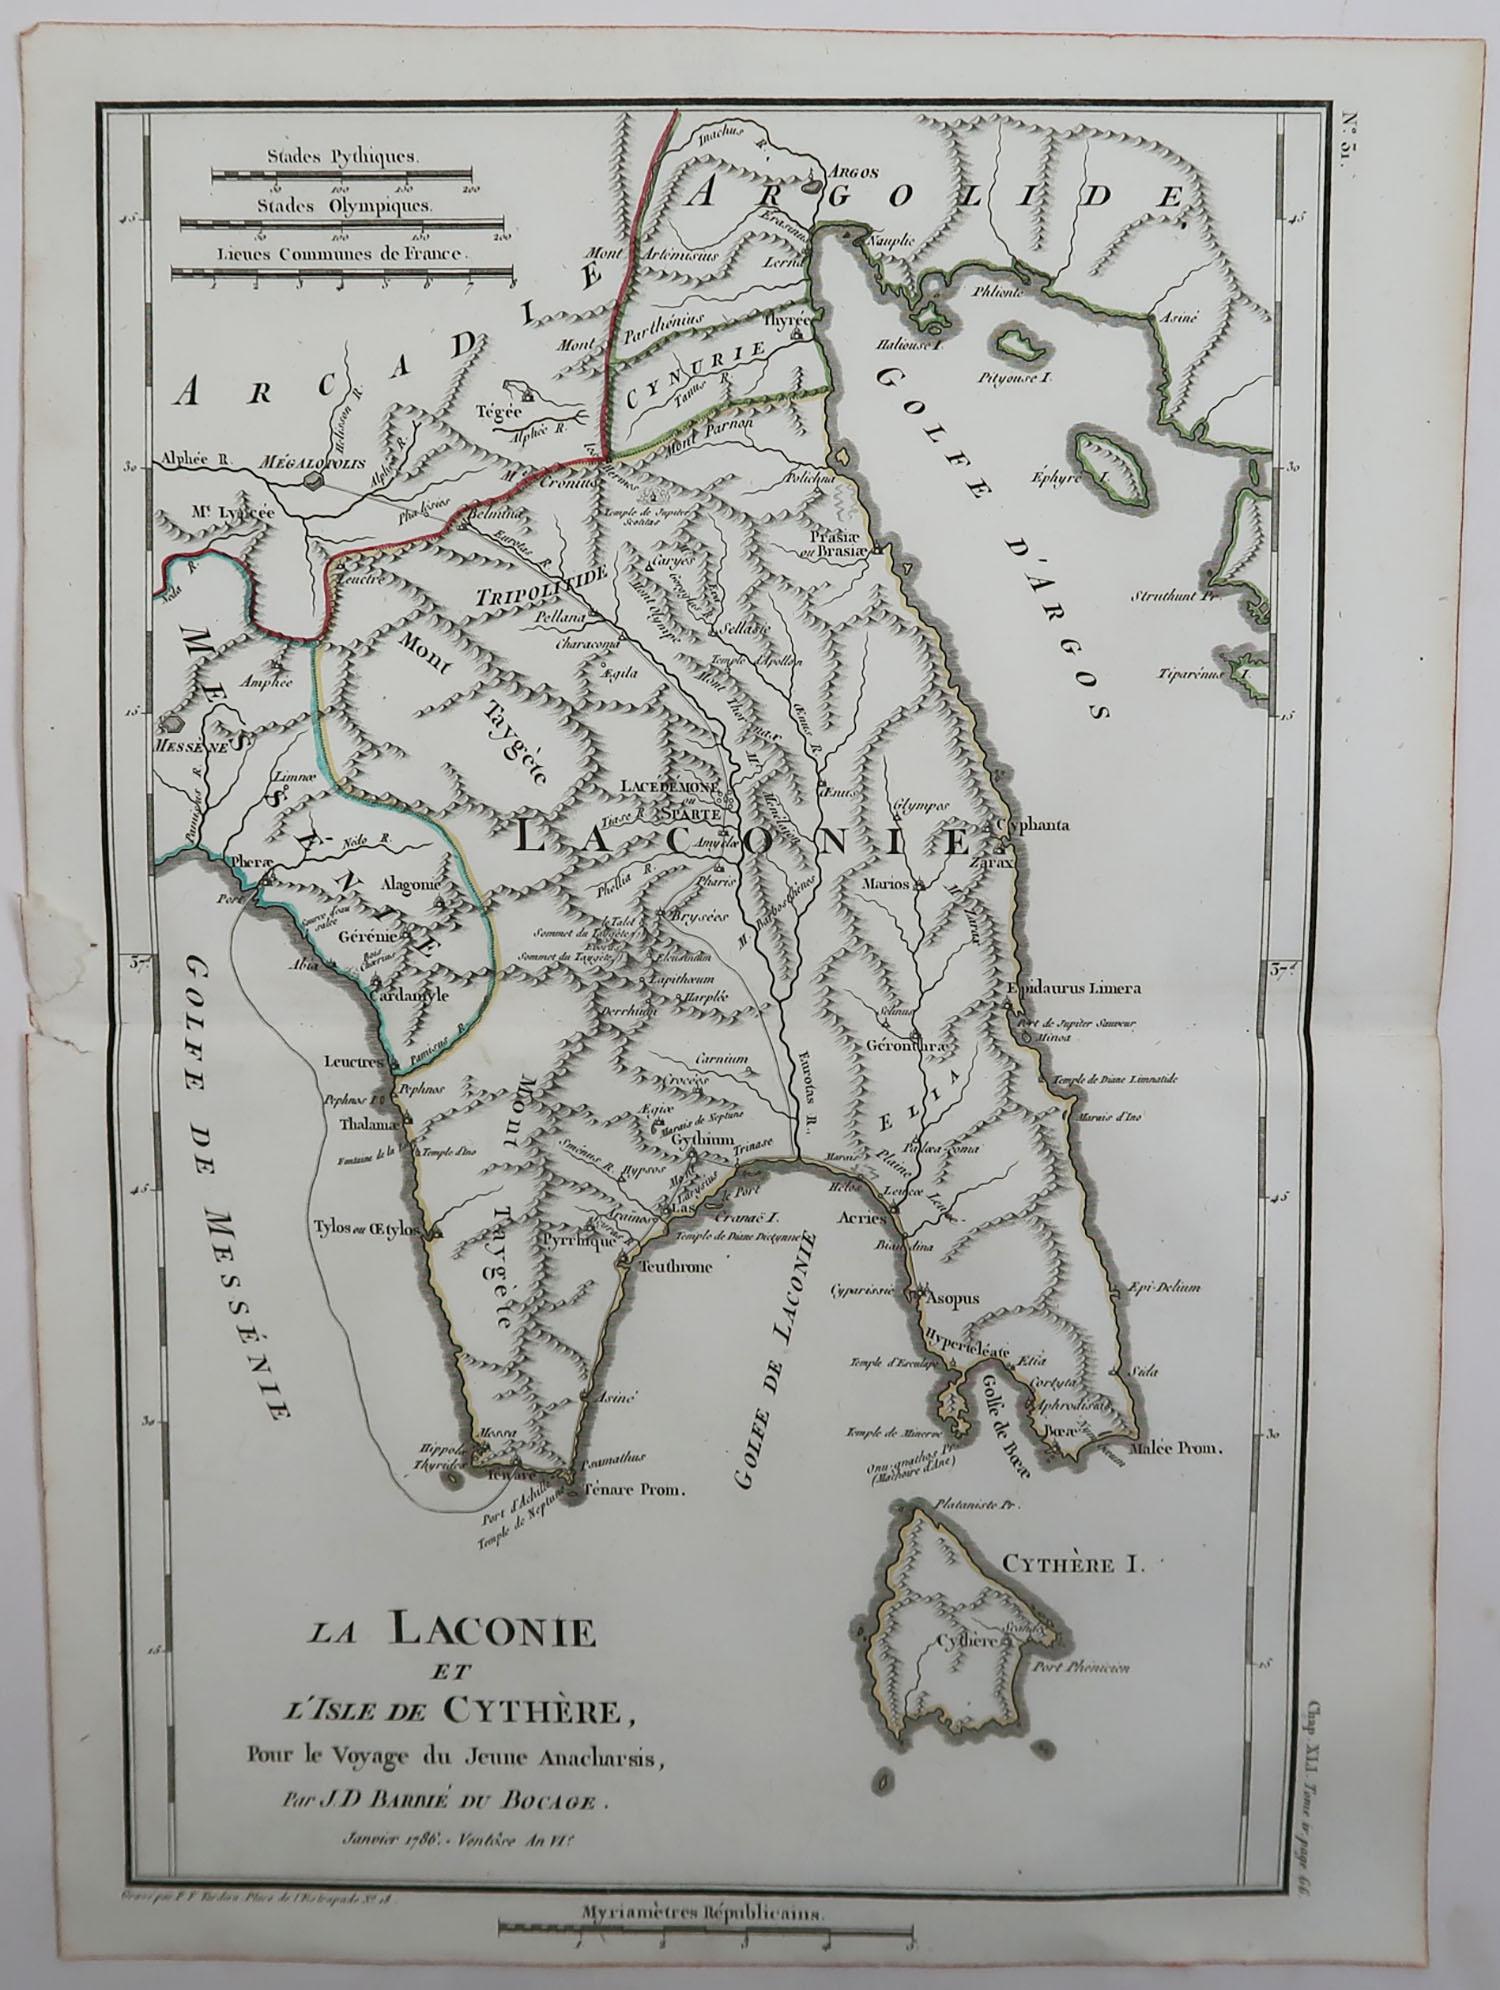 French Original Antique Map of Ancient Greece, Laconia, Island of Cythera, 1786